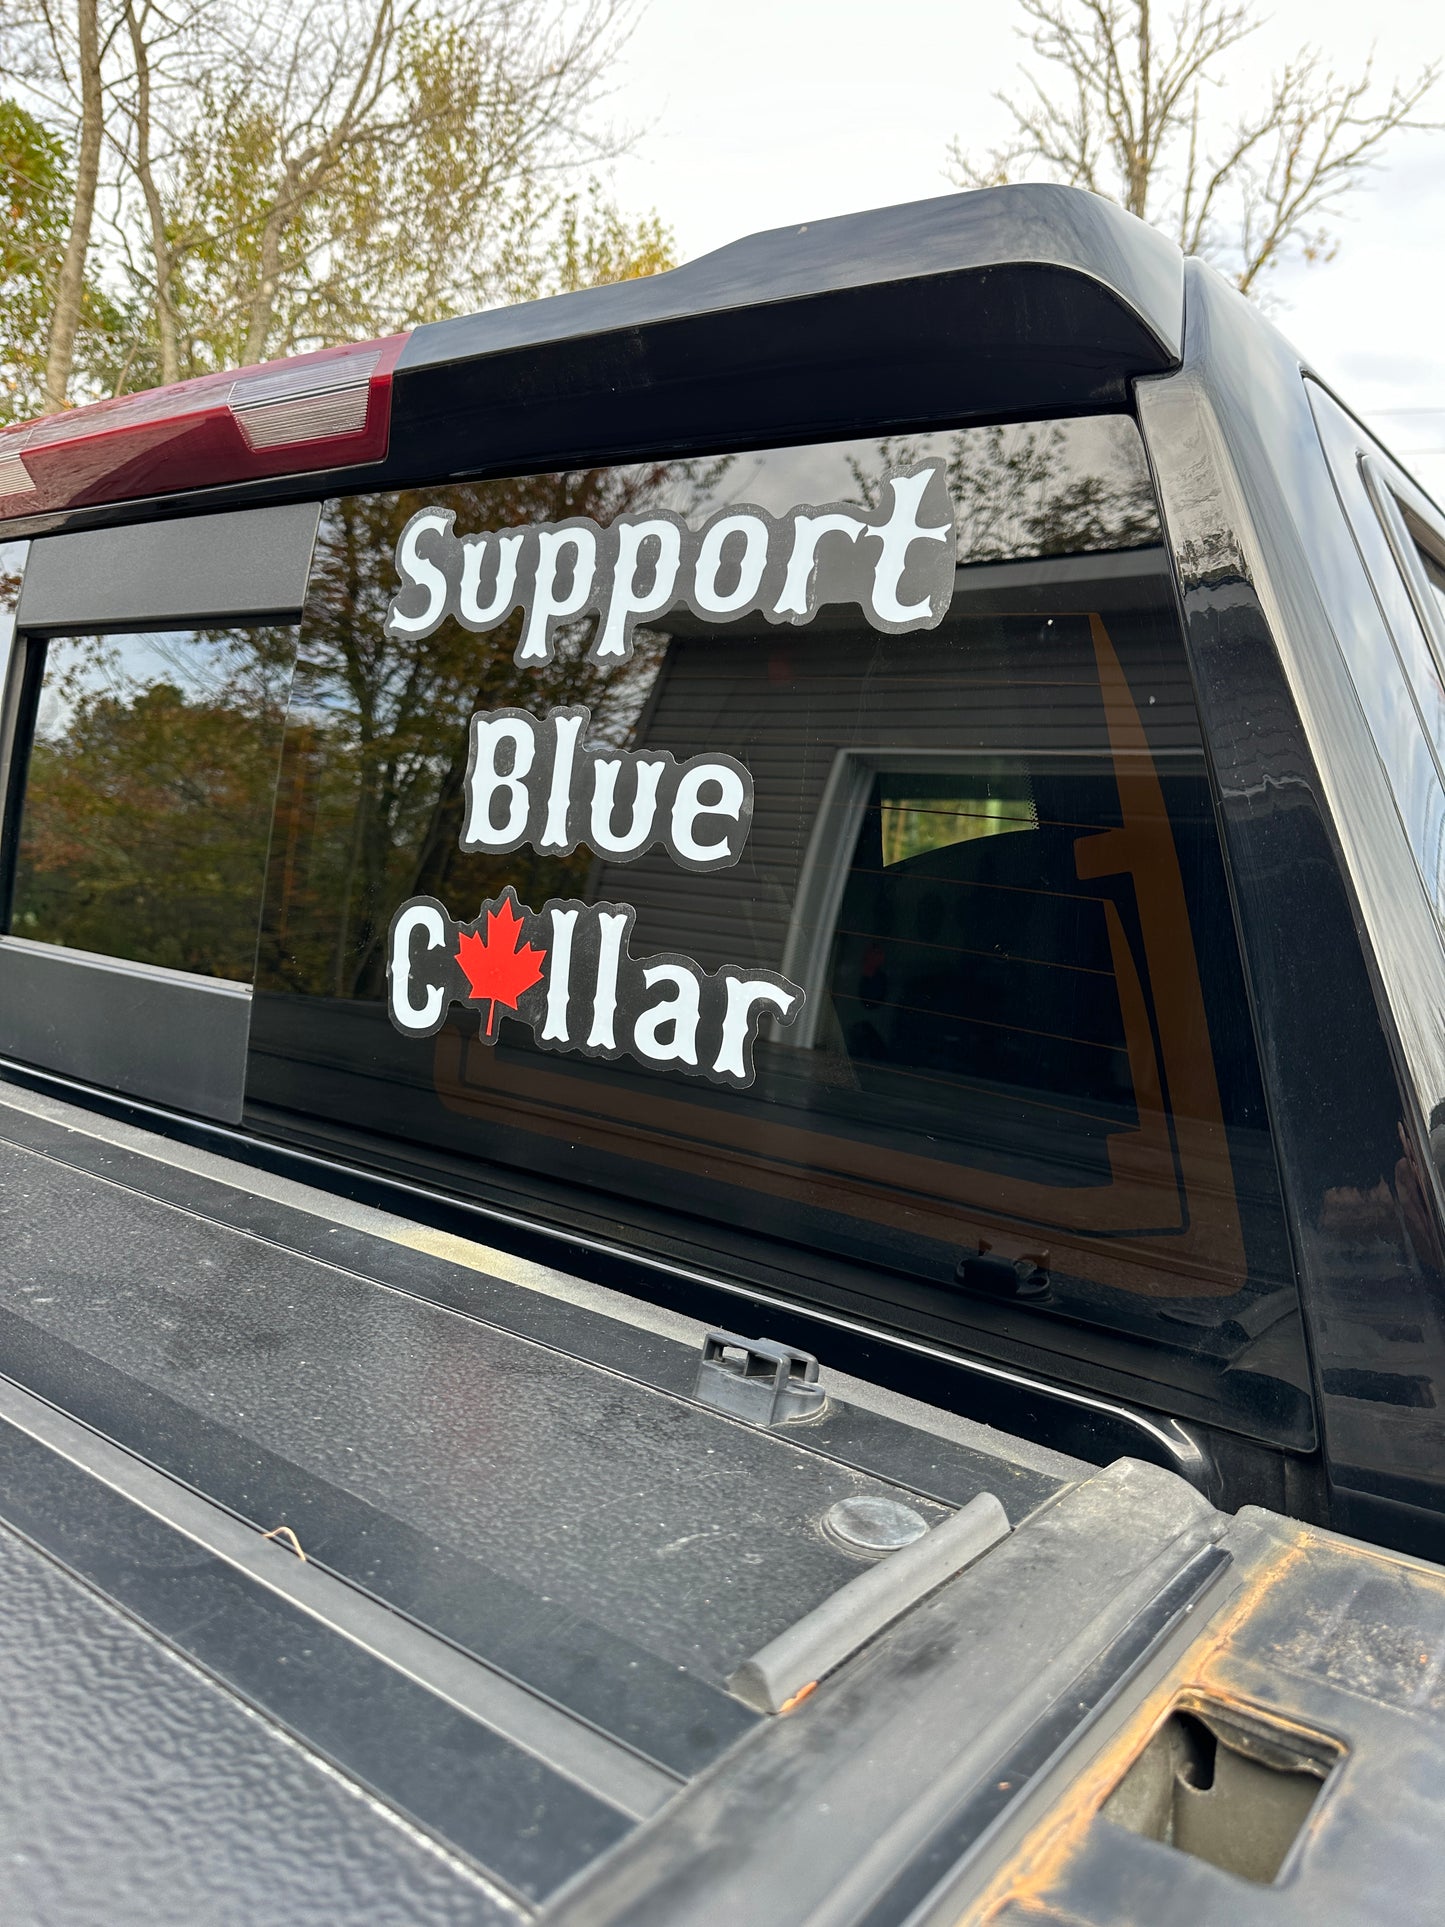 Support Blue Collar Window Decal